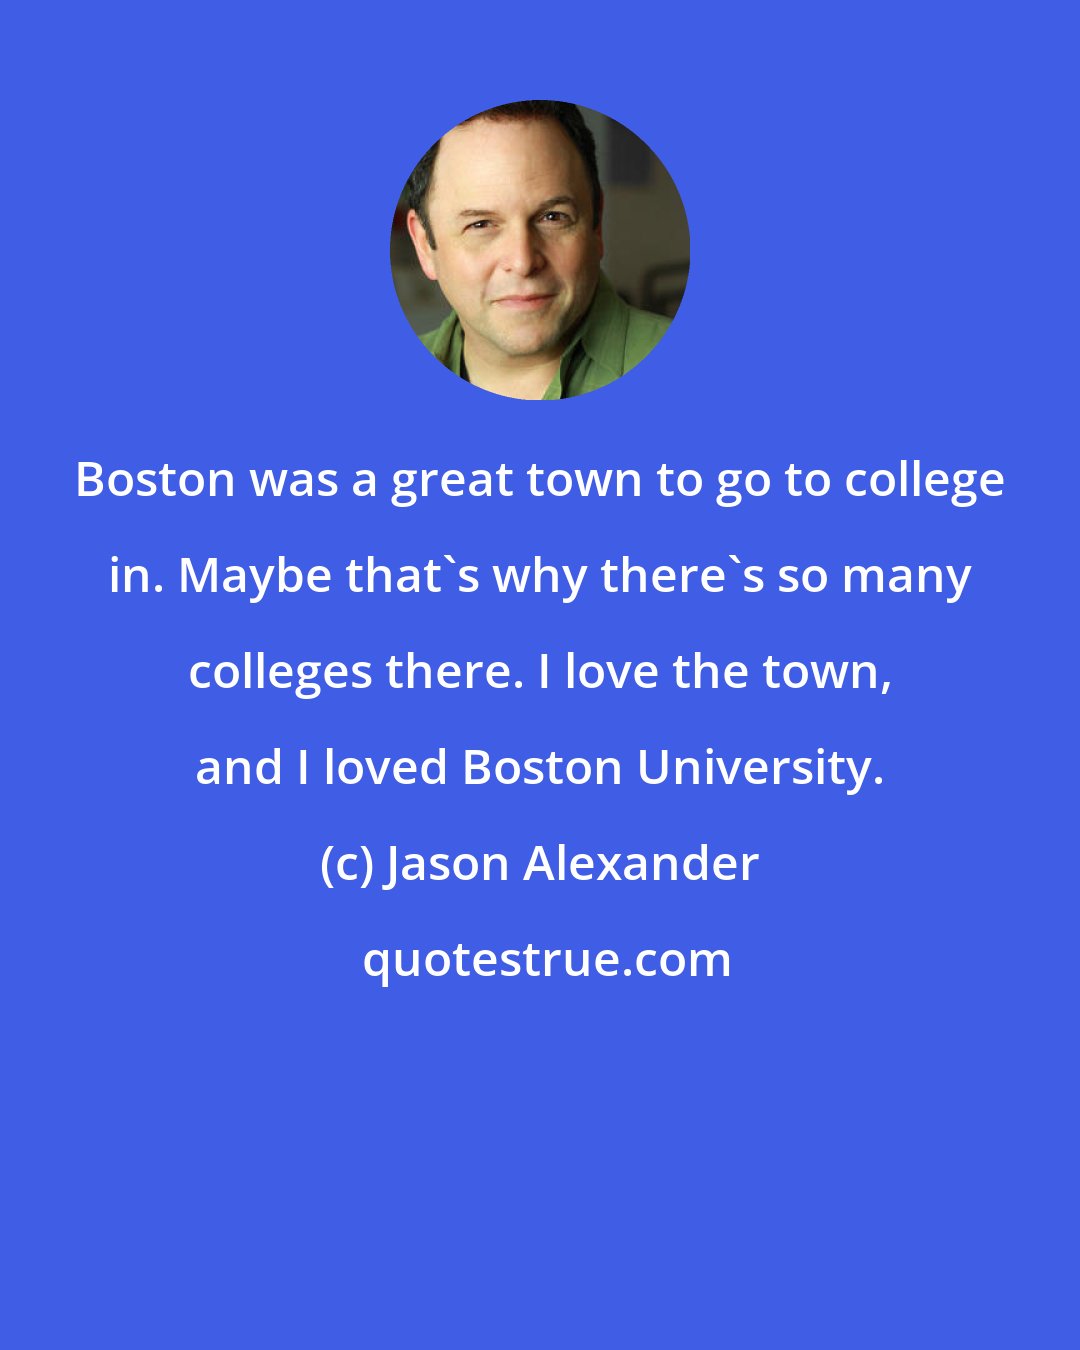 Jason Alexander: Boston was a great town to go to college in. Maybe that's why there's so many colleges there. I love the town, and I loved Boston University.